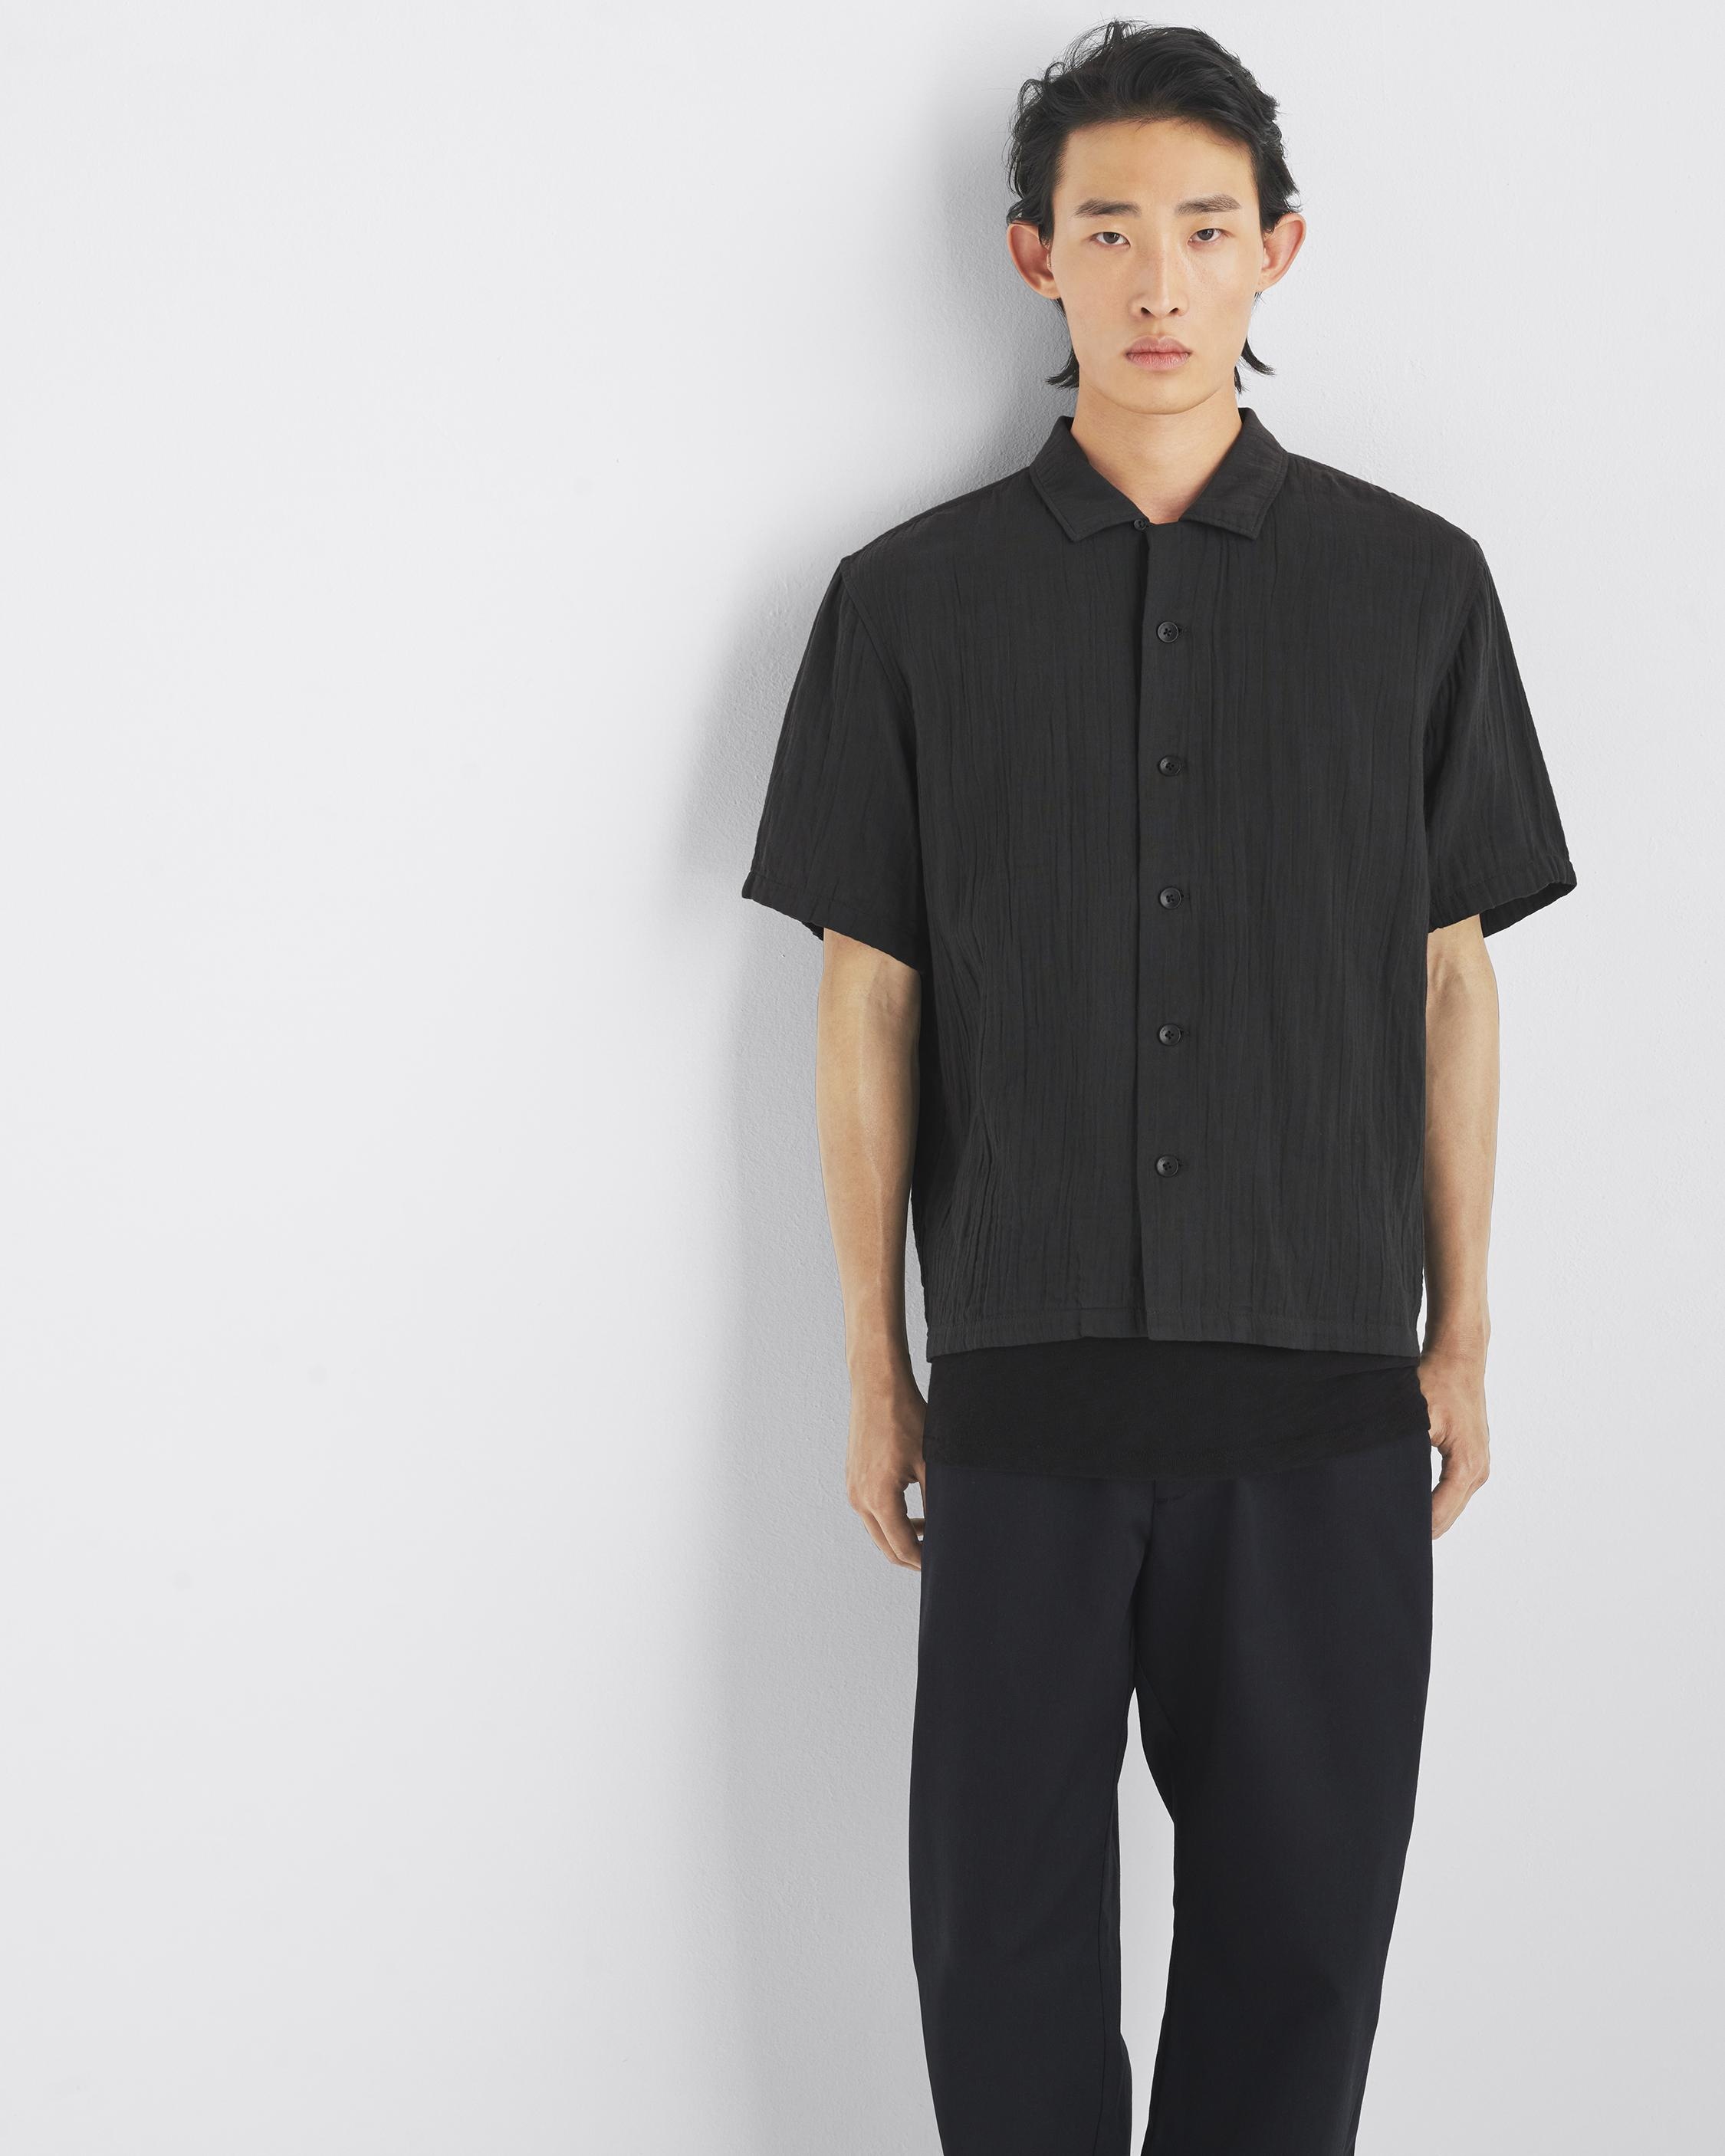 Avery Gauze Camp Shirt
Relaxed Fit - 2